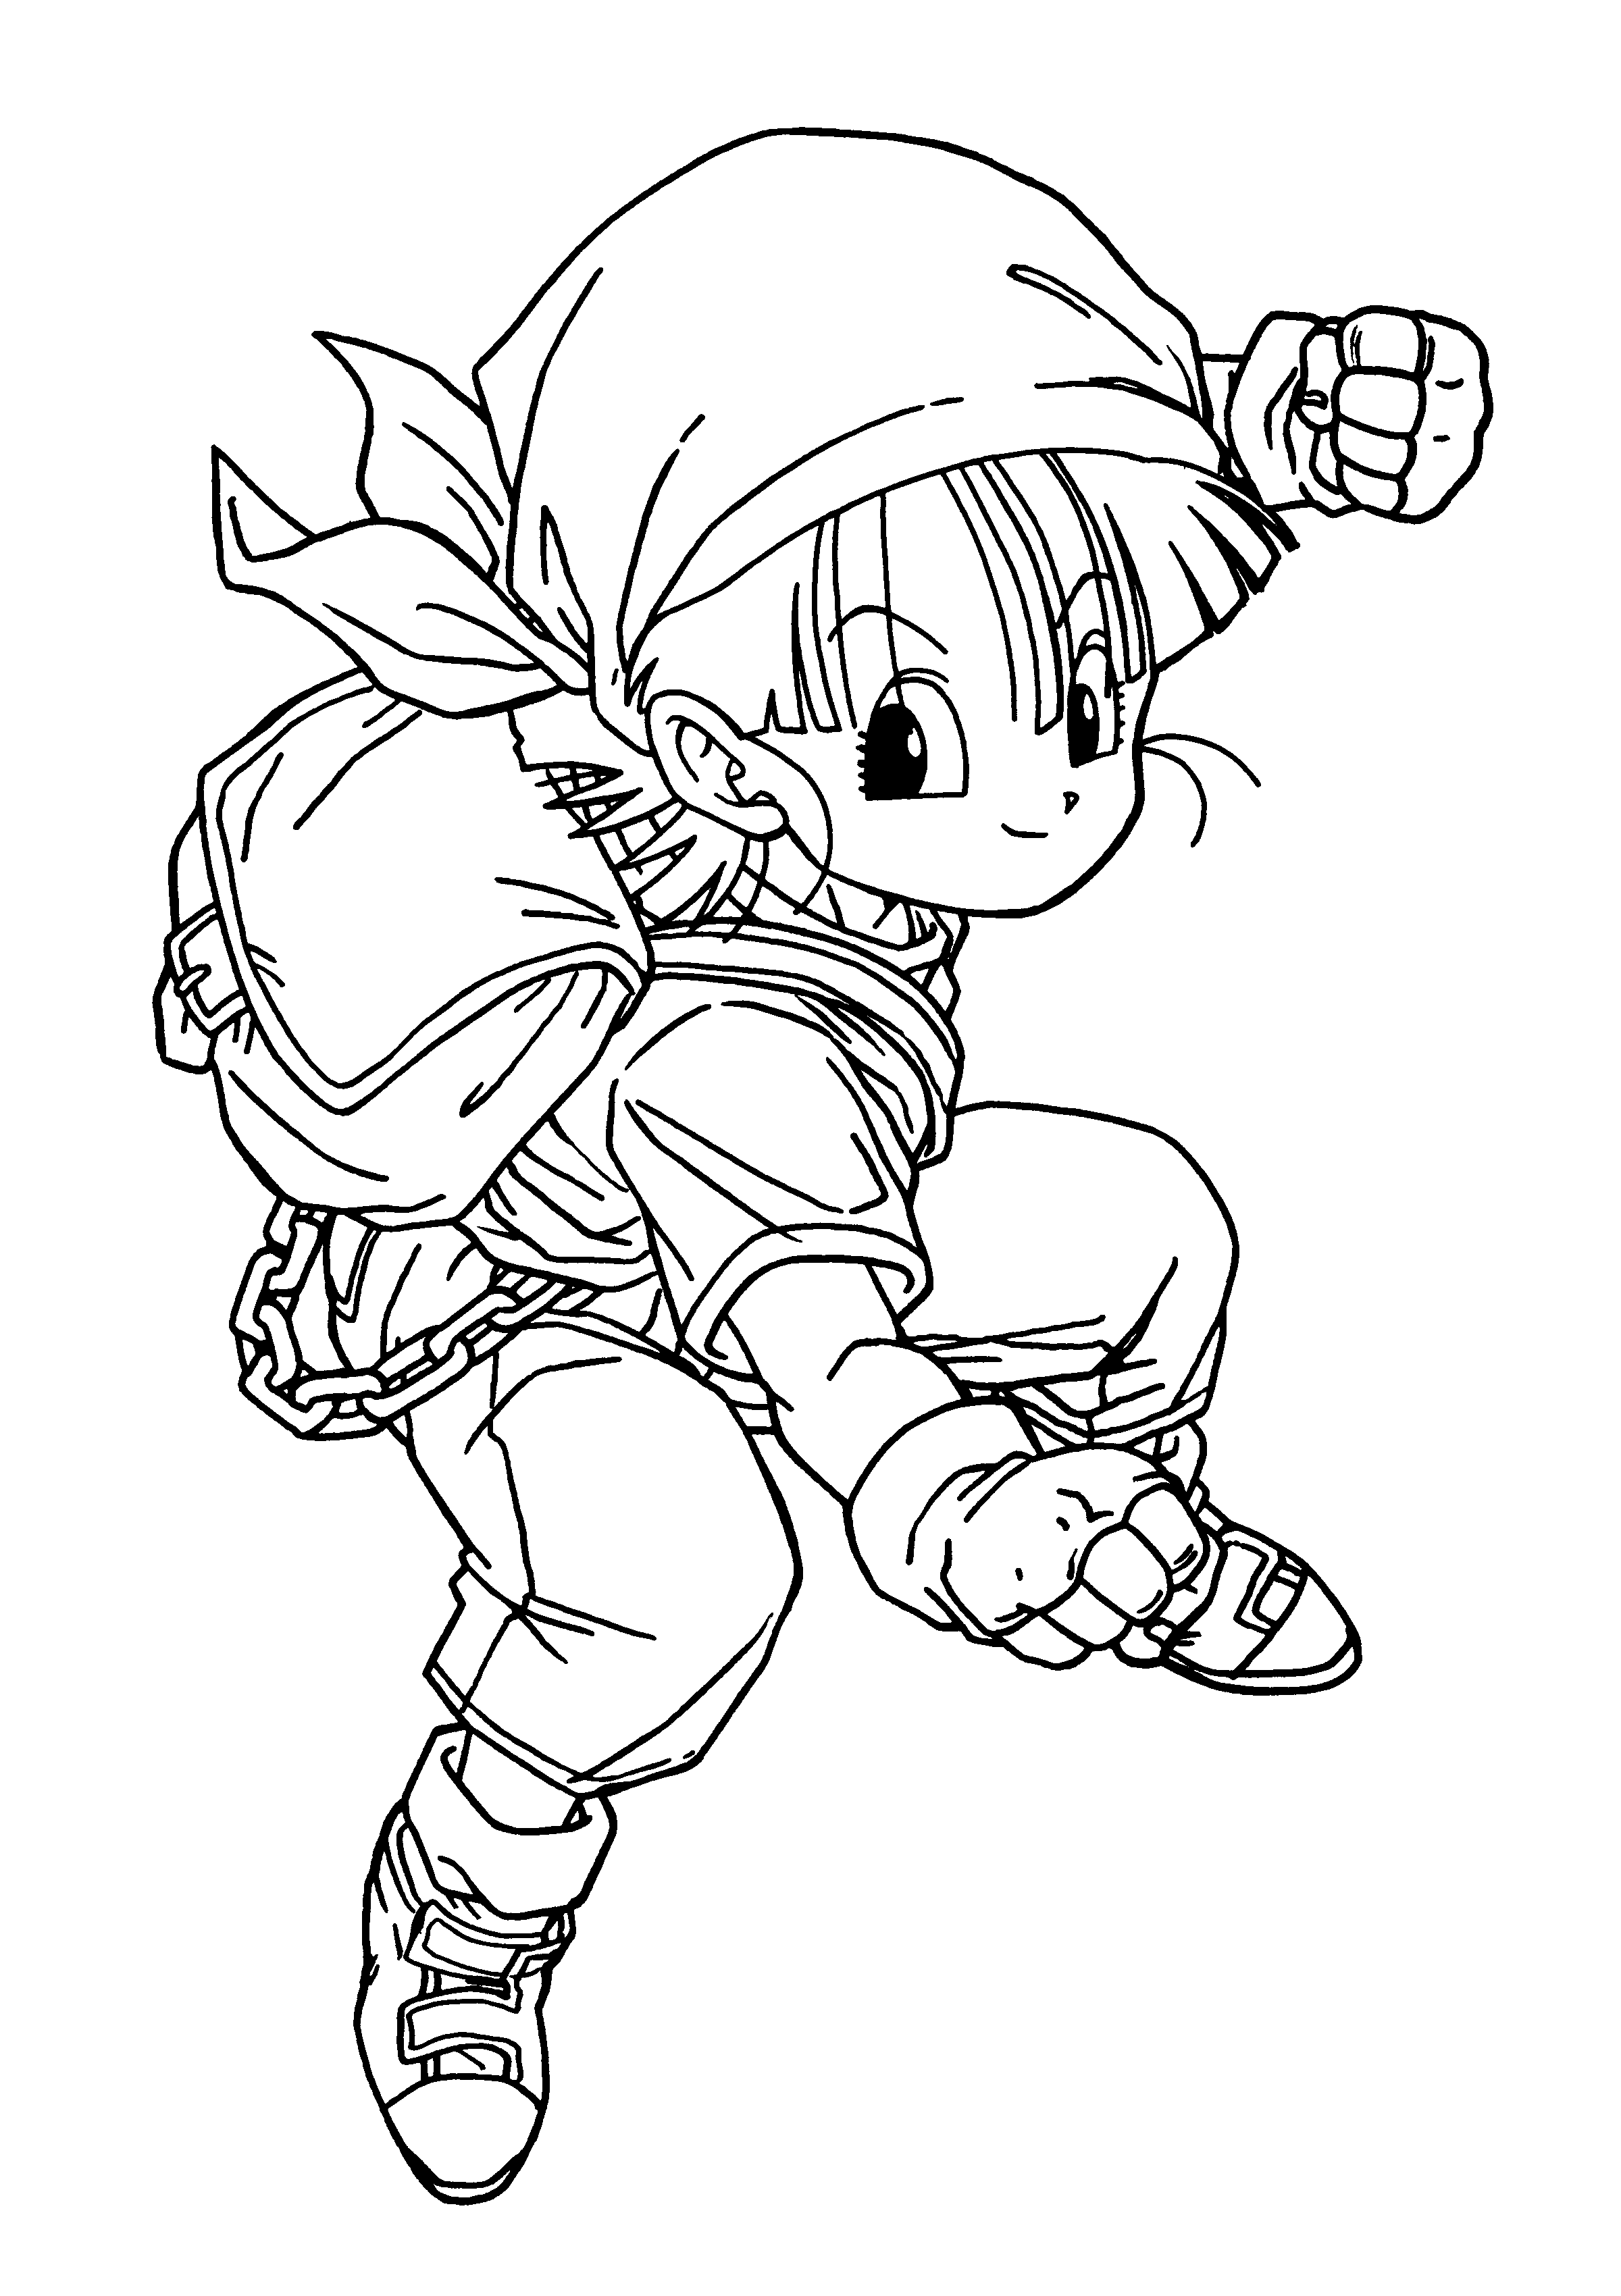 Android 19 Dragon Ball Z Coloring Pages - Coloring Pages For All Ages